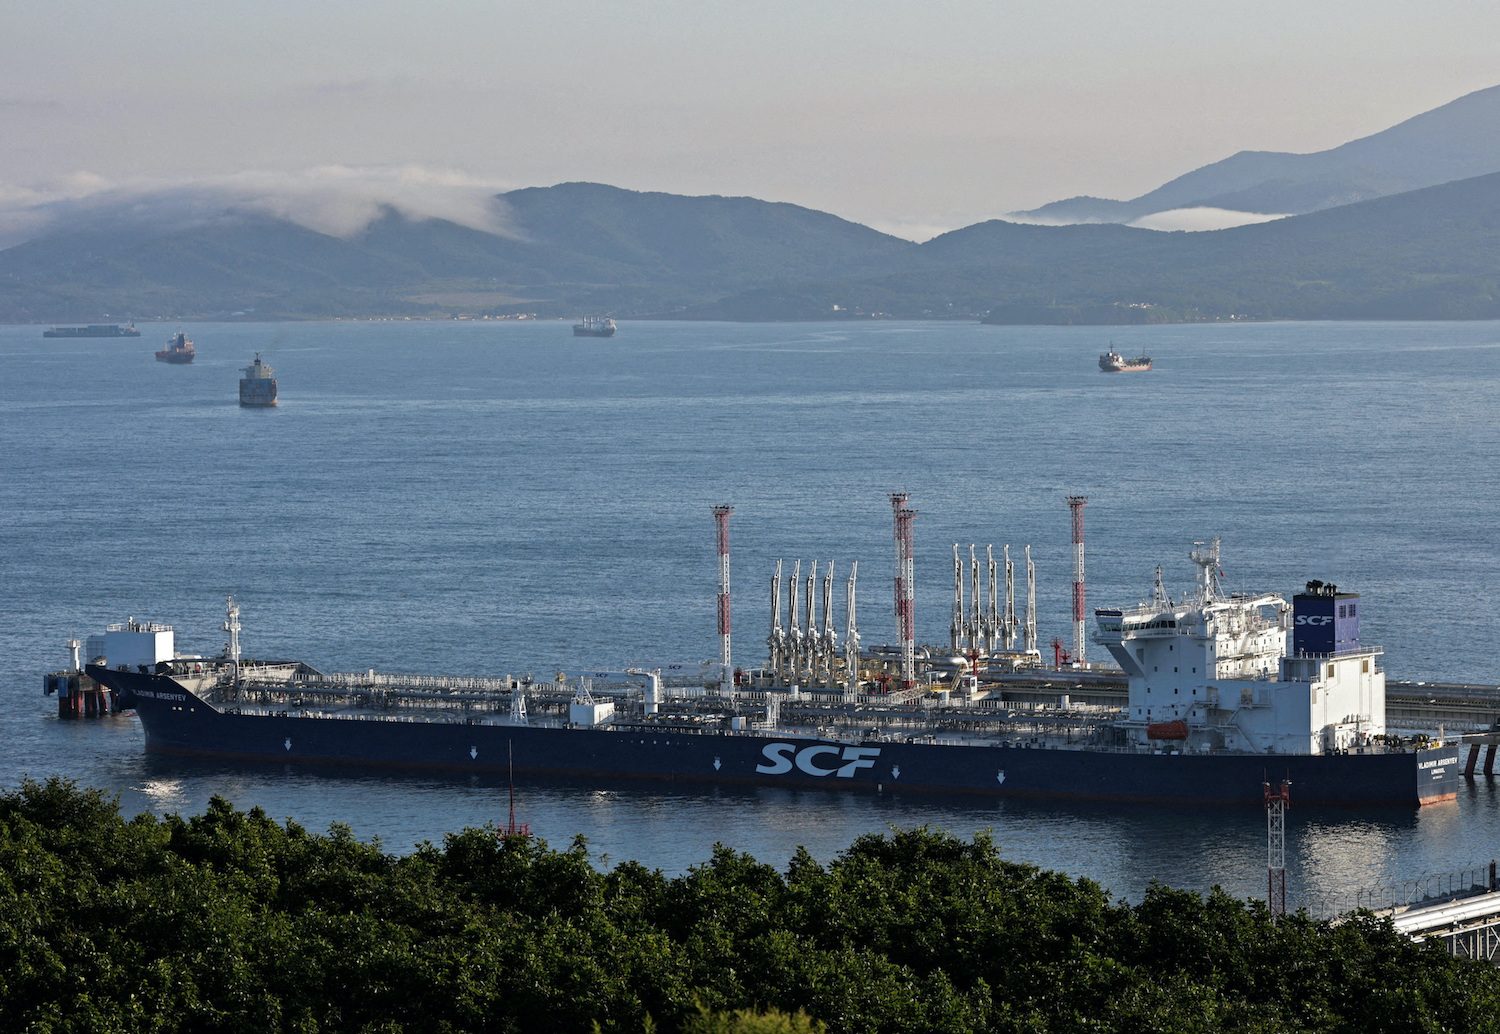 EXPLAINER: Russia’s tanker fleet too small to bypass oil price cap